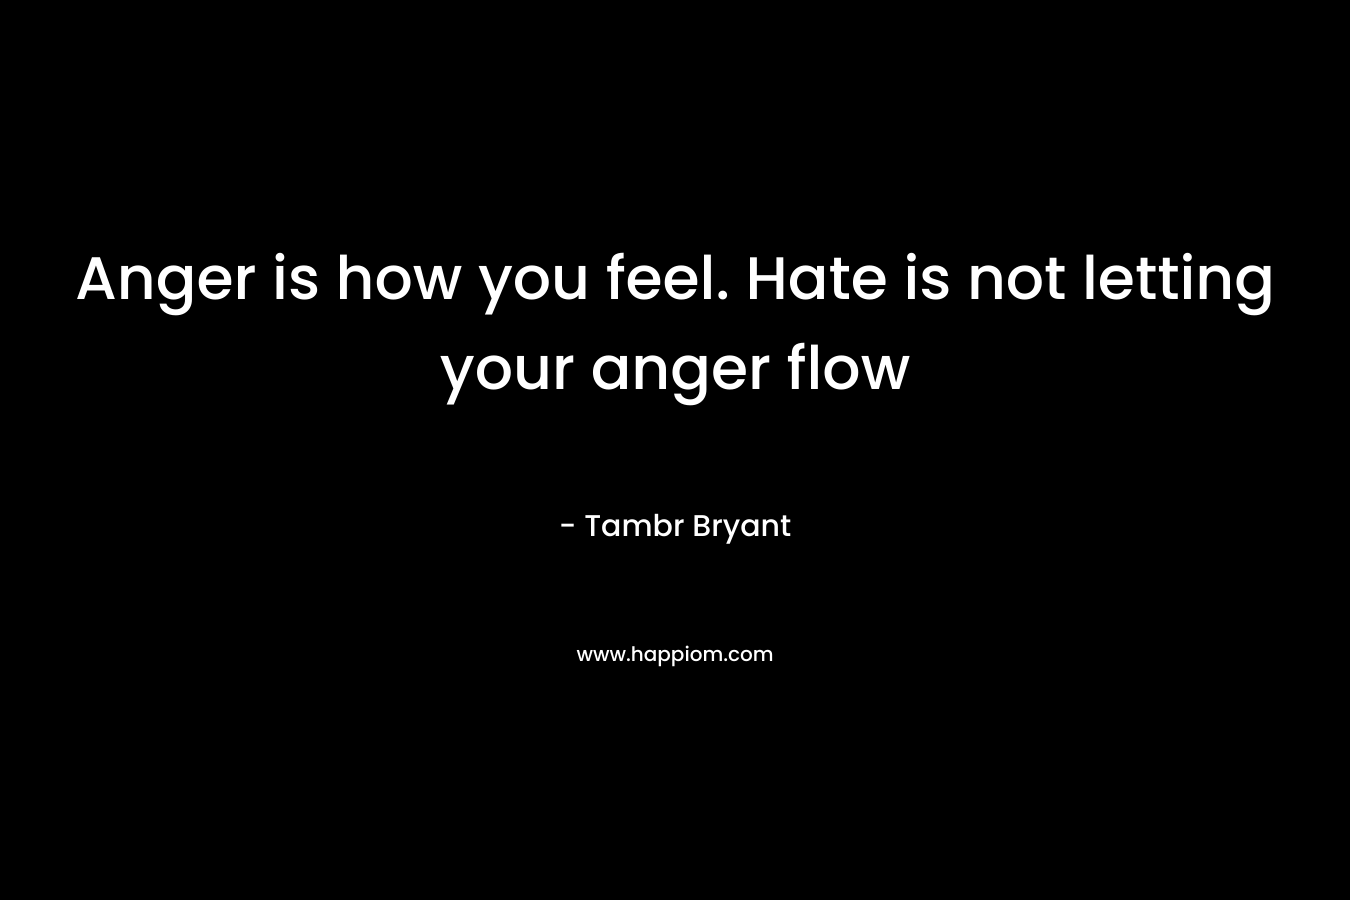 Anger is how you feel. Hate is not letting your anger flow